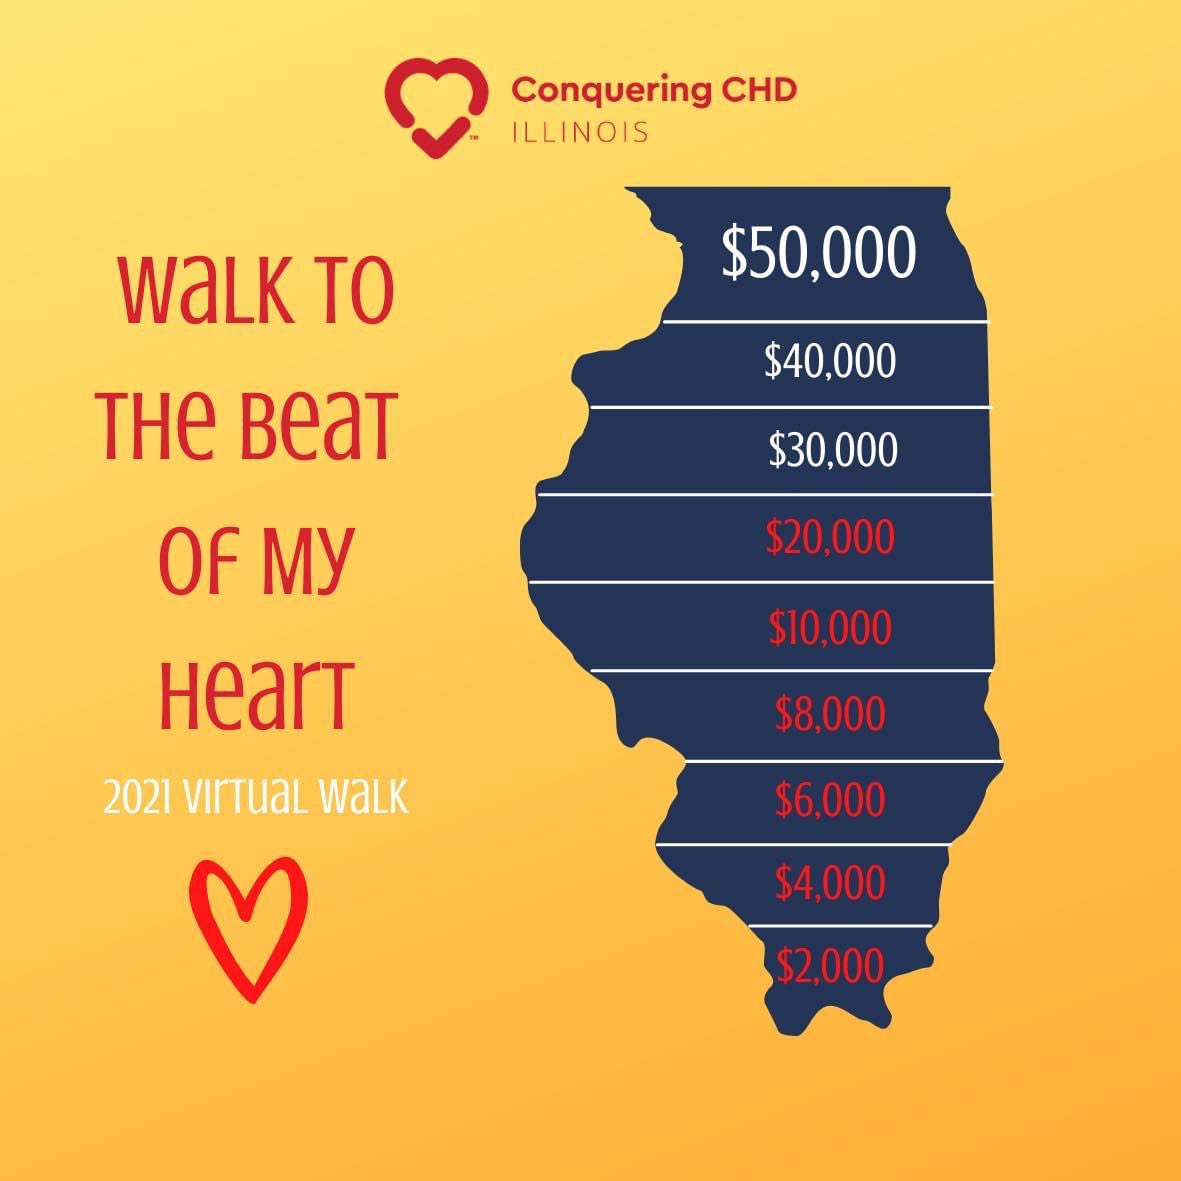 A HUGE THANK YOU IS IN ORDER!!! Thank you to our walkers, our teams, everyone who has purchased swag and bought raffle tickets. It is because of YOU that we have hit $20,000!! We are $30,000 away from our $50,000 goal!! Who will help us get there?